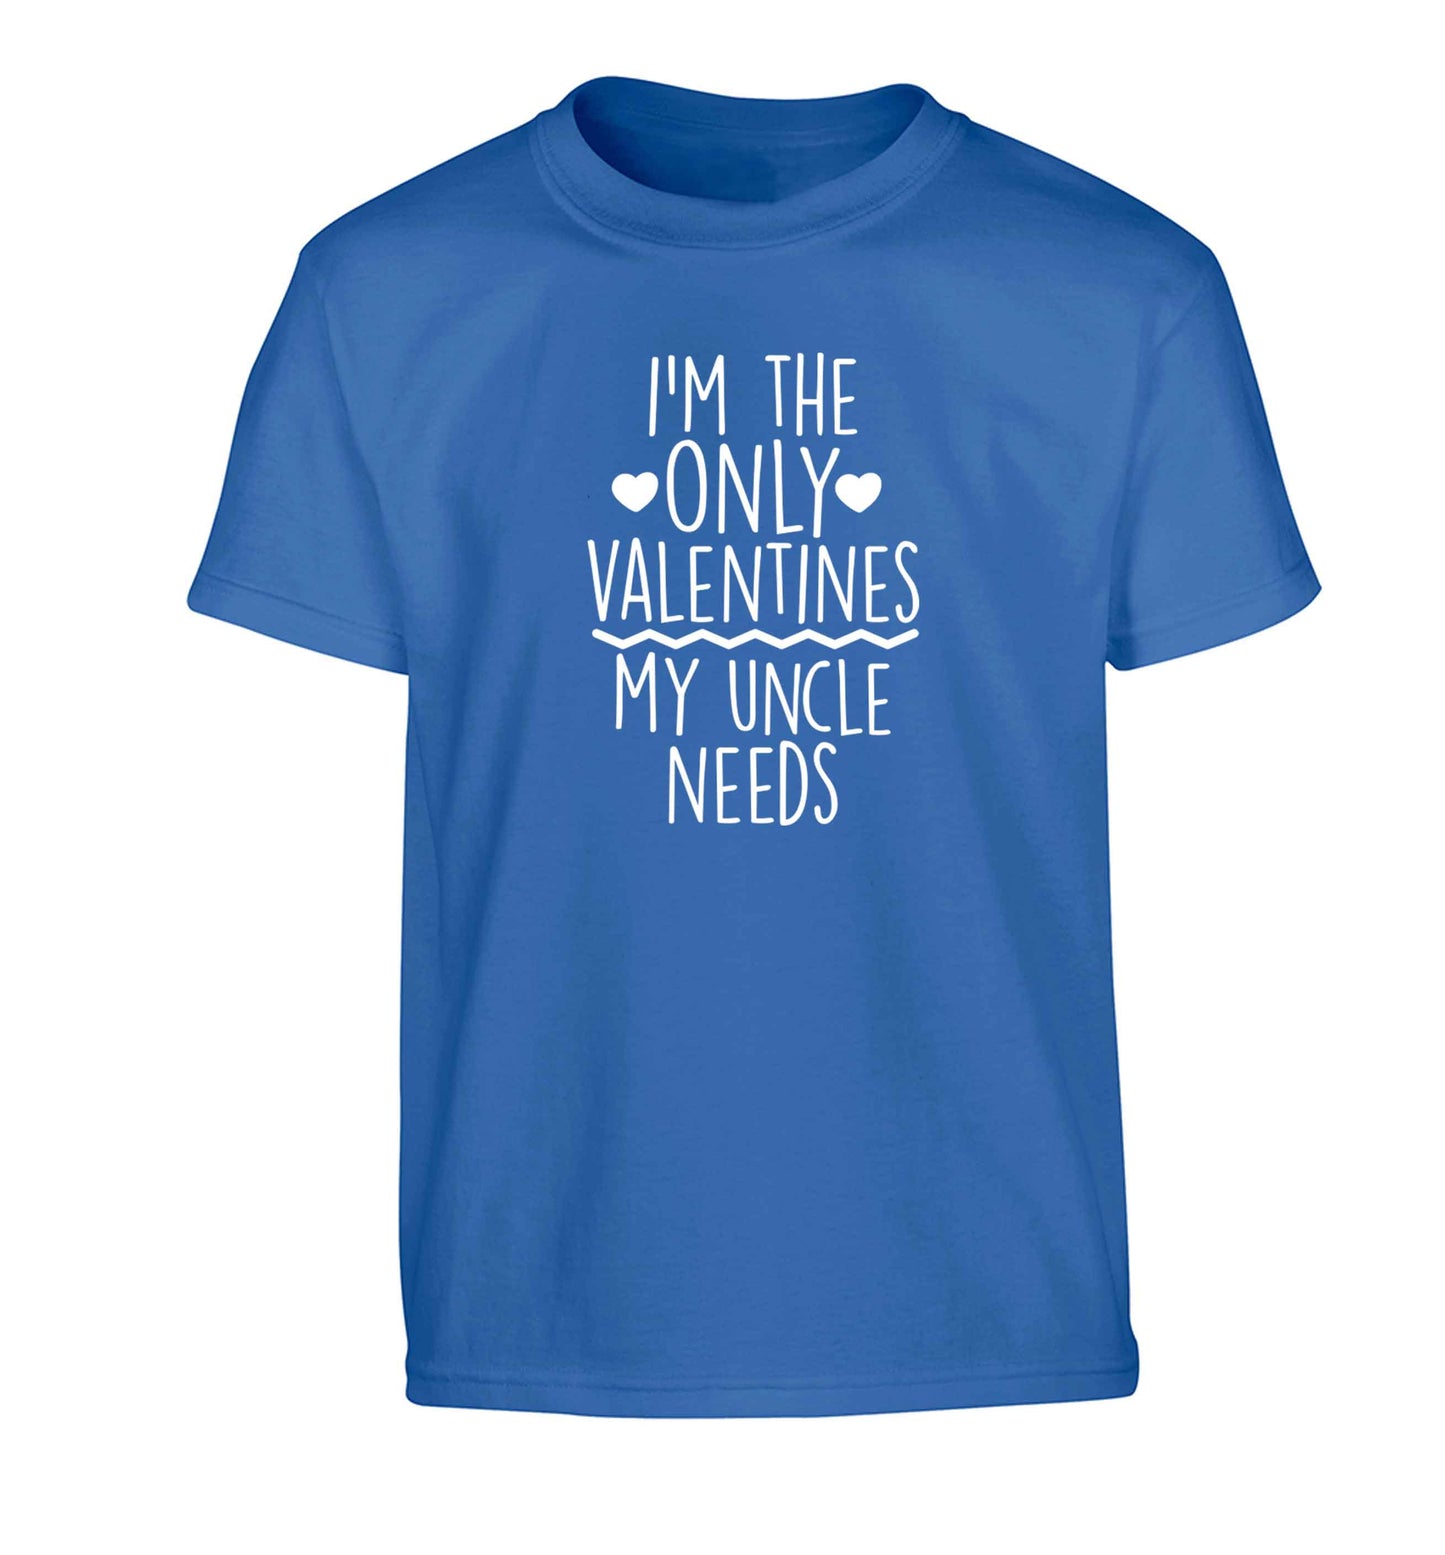 I'm the only valentines my uncle needs Children's blue Tshirt 12-13 Years